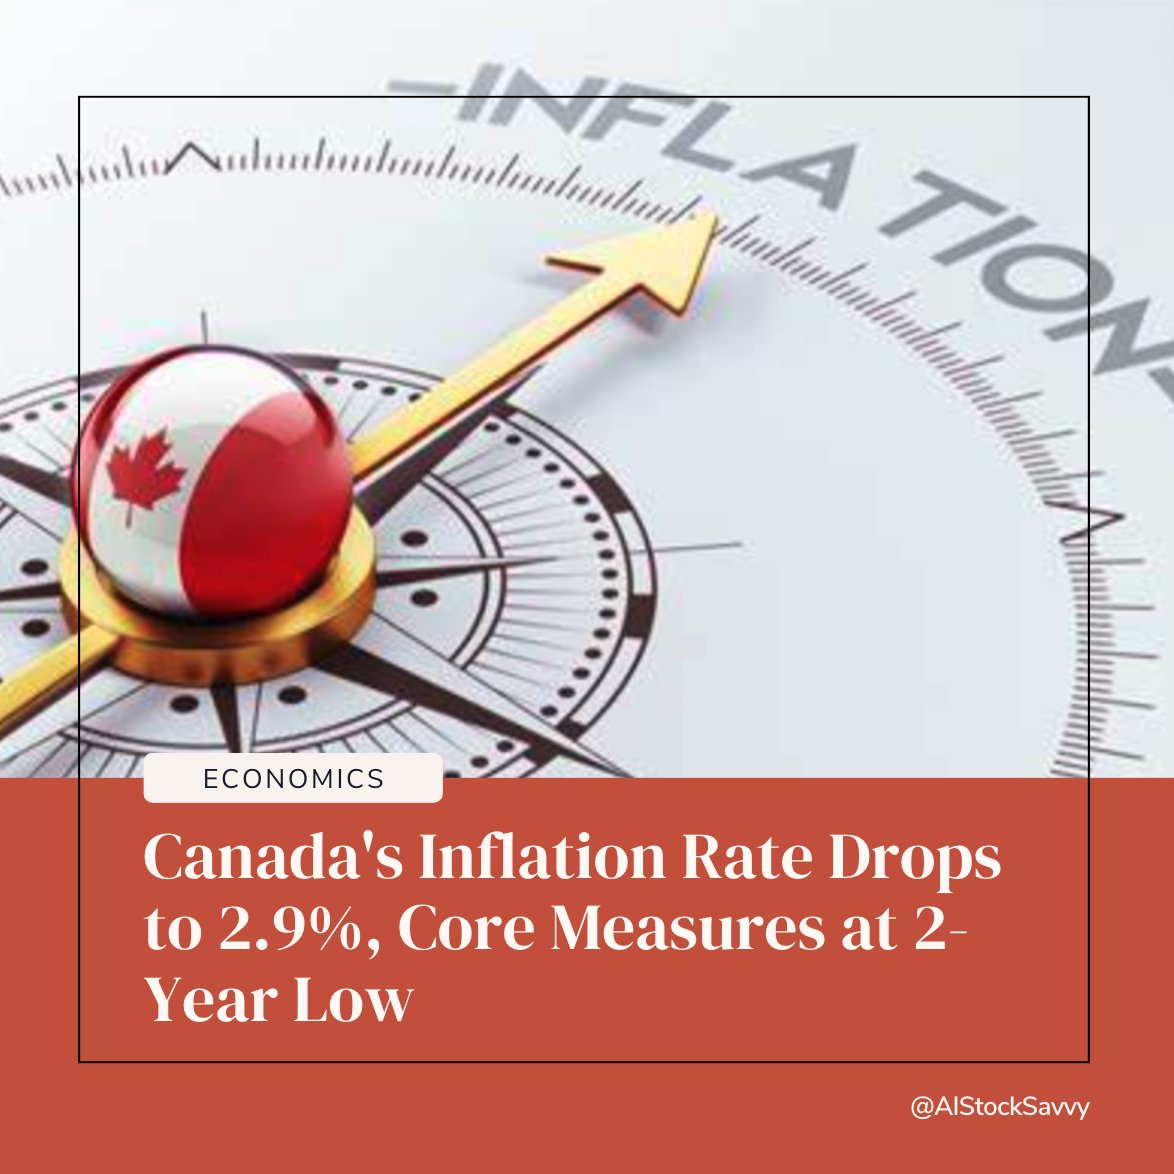 📣 Canada's Inflation Cools to 2.9% in January, Surpassing Expectations with Significant Drops in Core Inflation. #CanadaEconomy #InflationUpdate

Key Details:

📍 Canada's annual inflation rate falls to 2.9% in January, below the anticipated 3.3%.

📍 Decrease driven by lower…